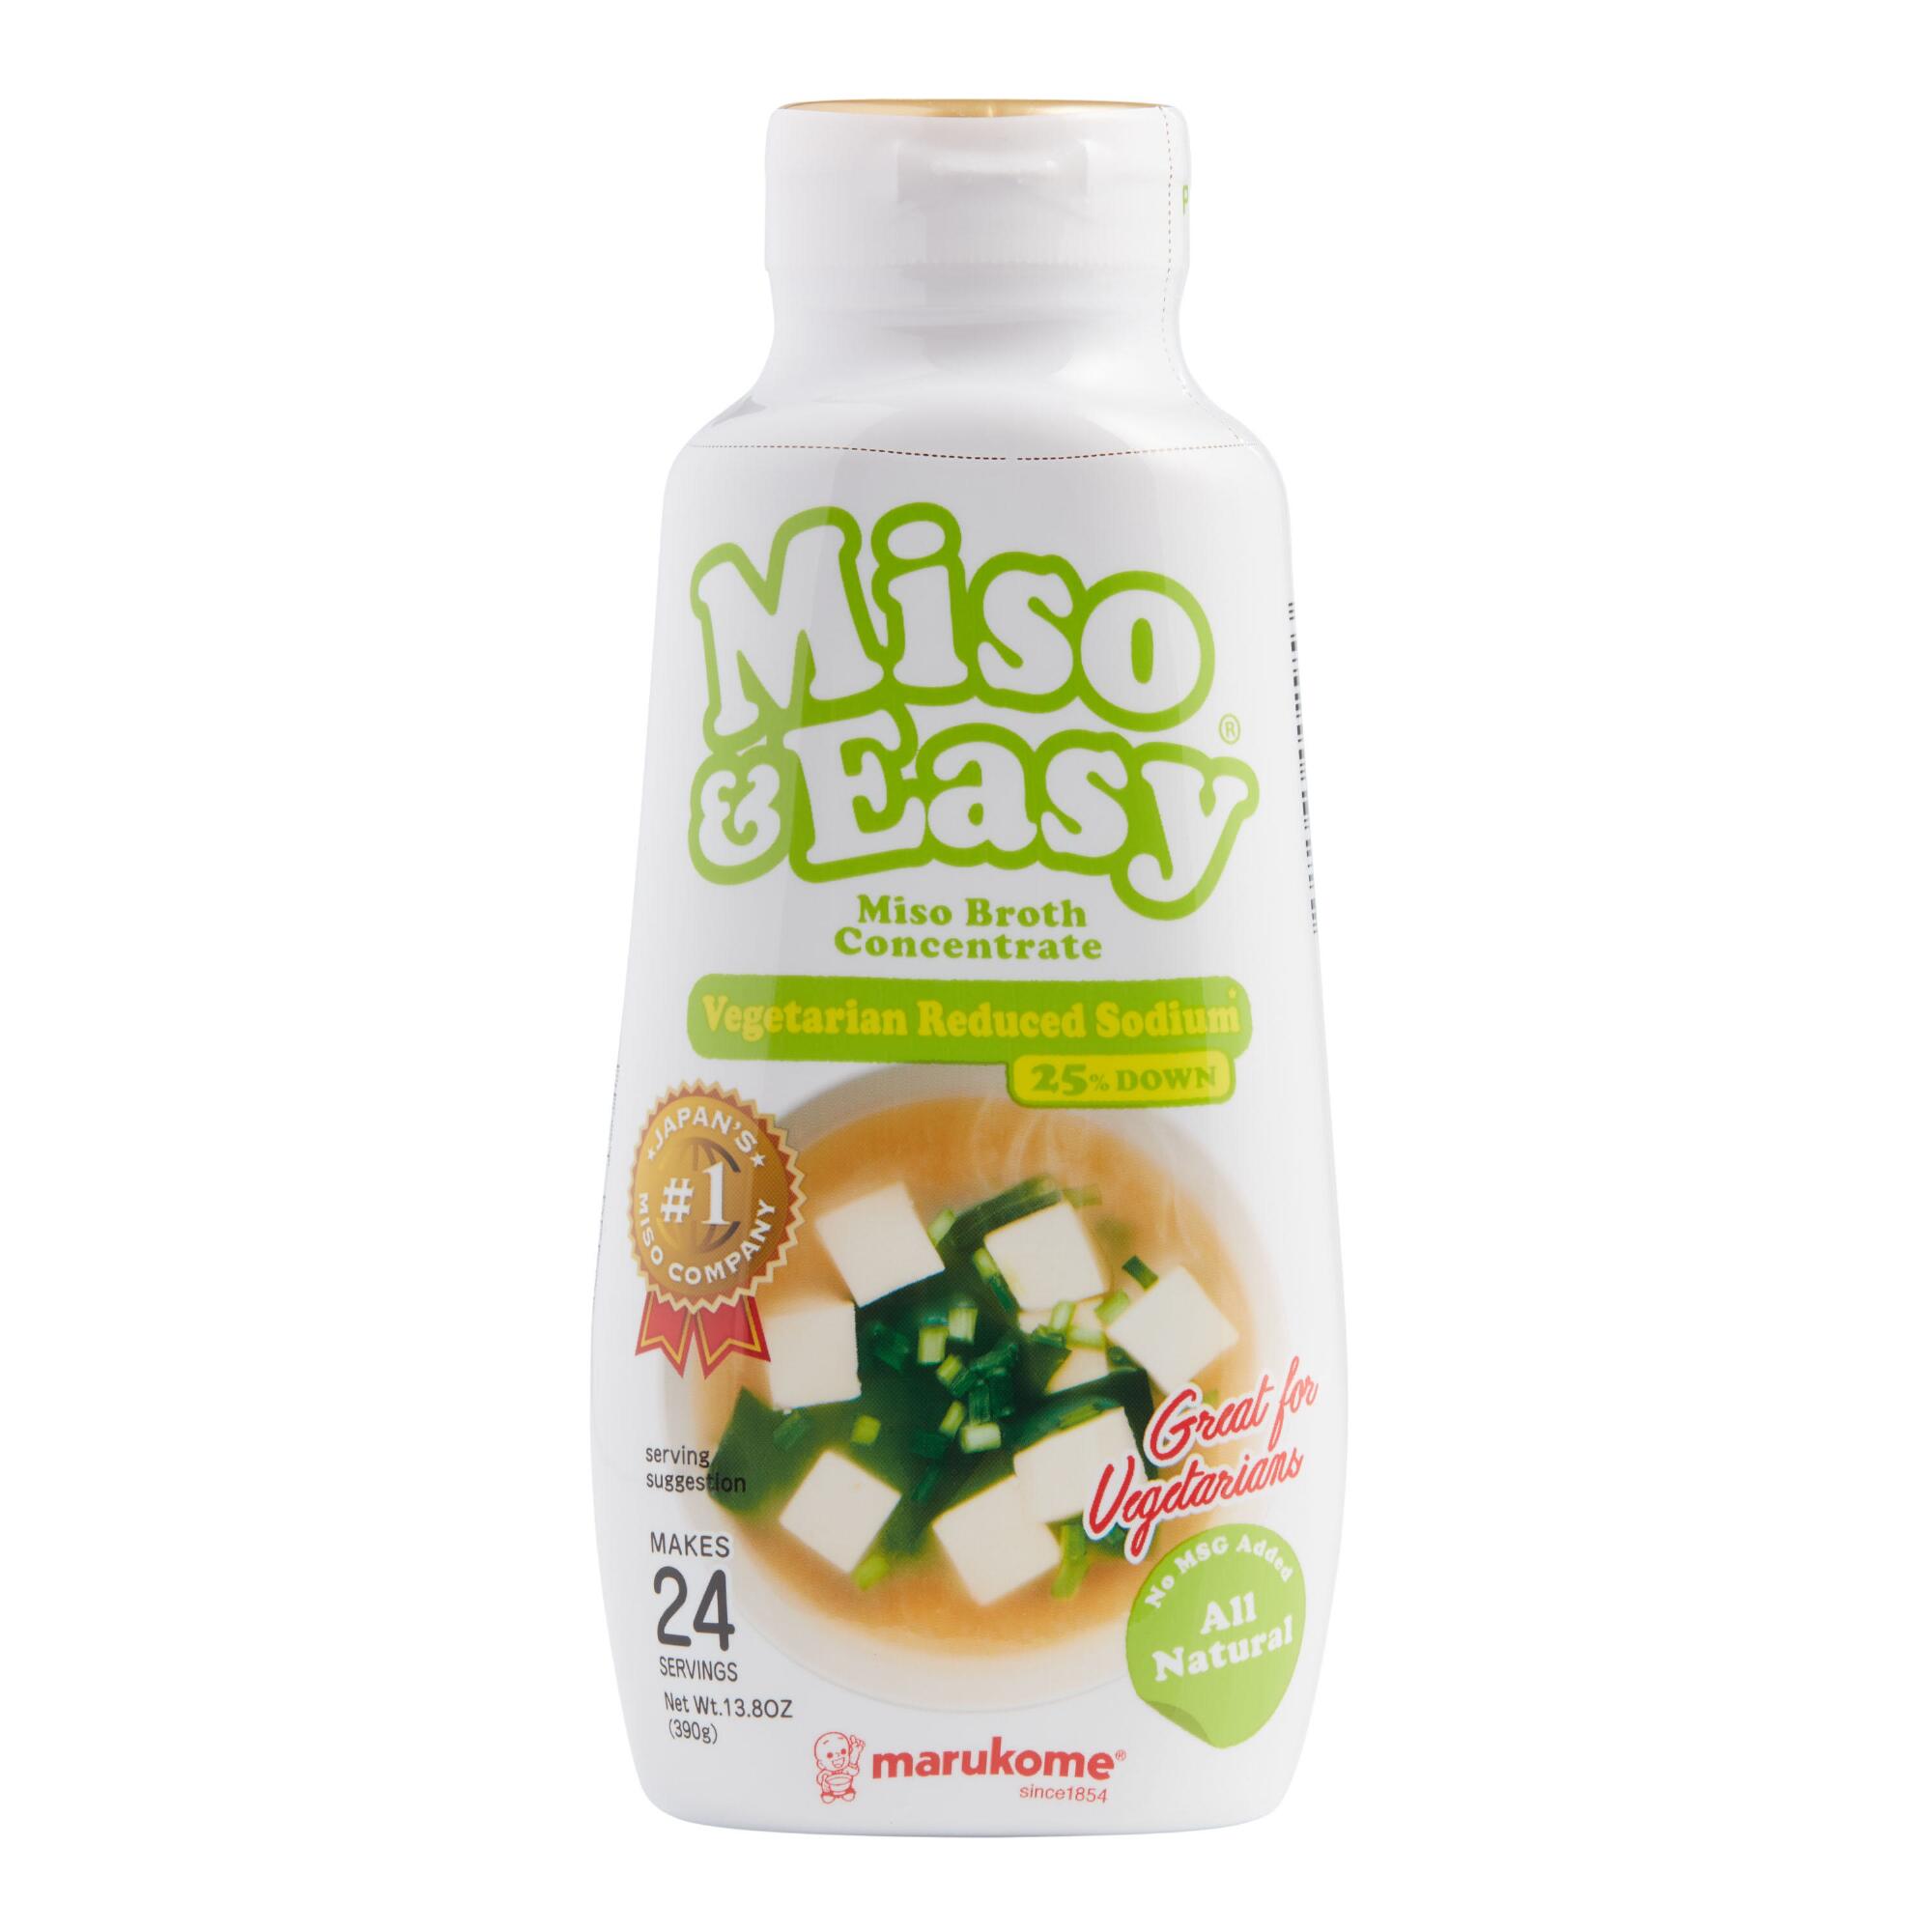 Miso & Easy Vegetarian Miso Broth Concentrate by World Market